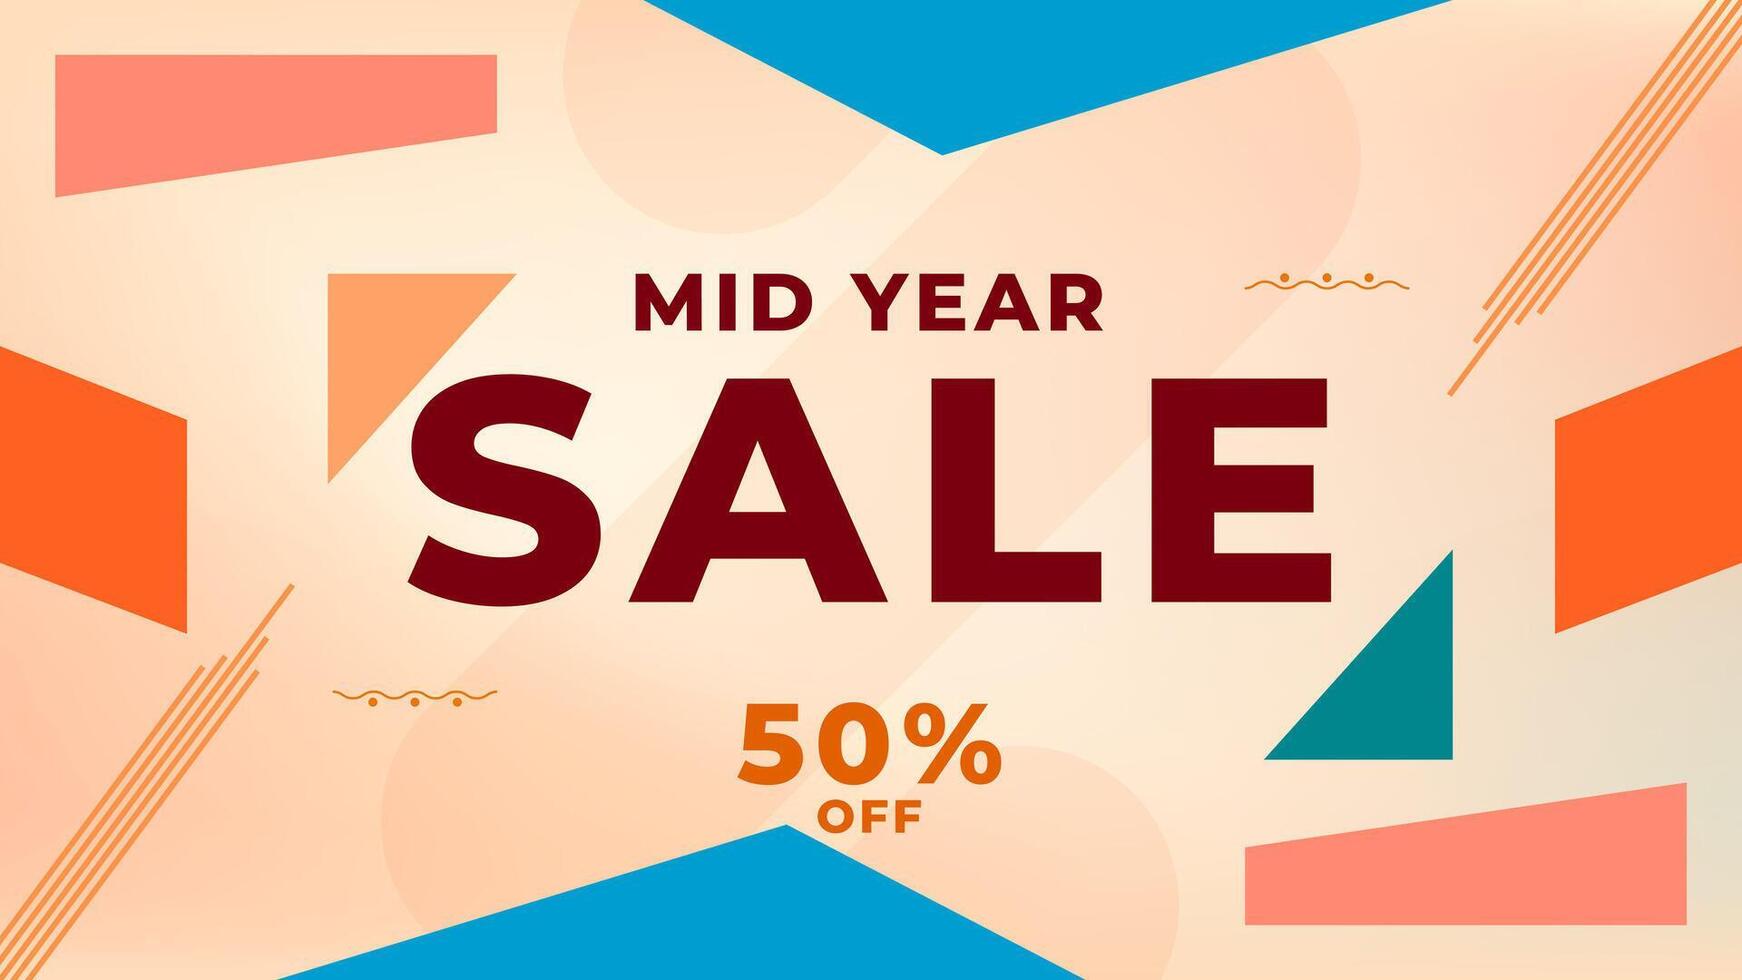 MID YEAR SALE OFFERS AND PROMOTION TEMPLATE BANNER DESIGN.COLORFUL GRADIENT COLOR BACKGROUND VECTOR. GOOD FOR SOCIAL MEDIA POST, COVER , POSTER vector